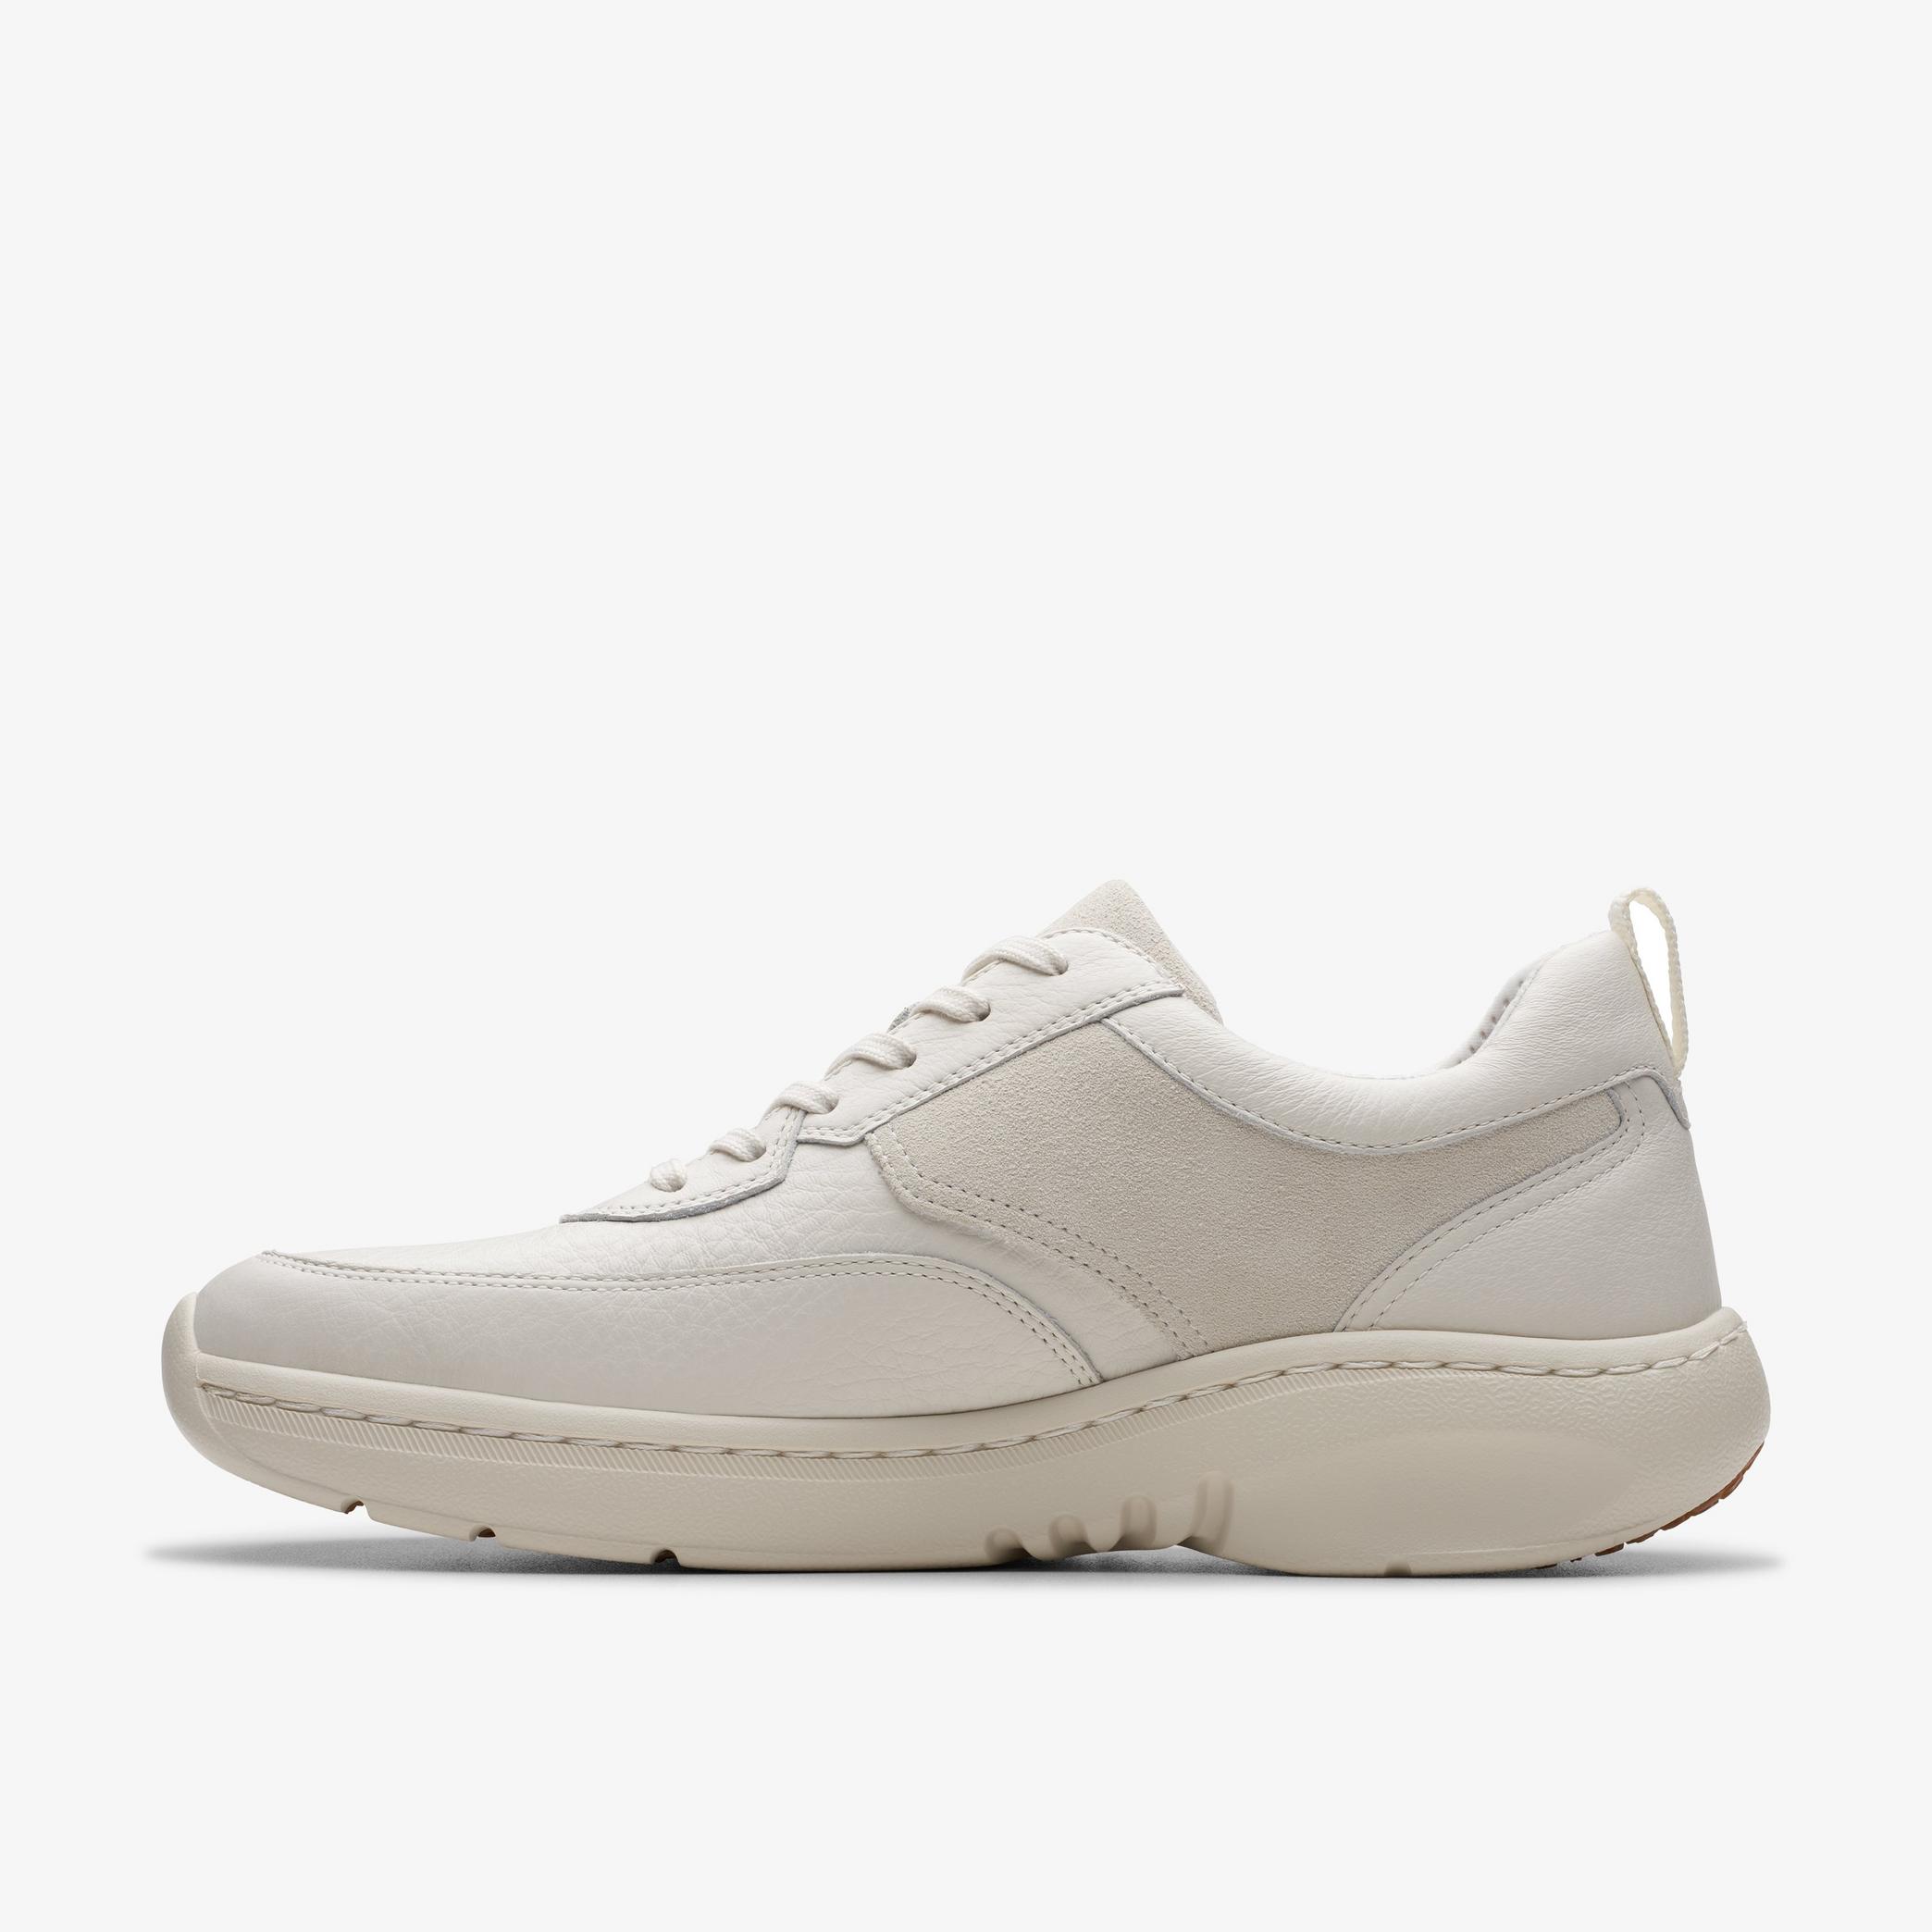 MENS Clarks Pro Lace White Leather Sneakers | Clarks US